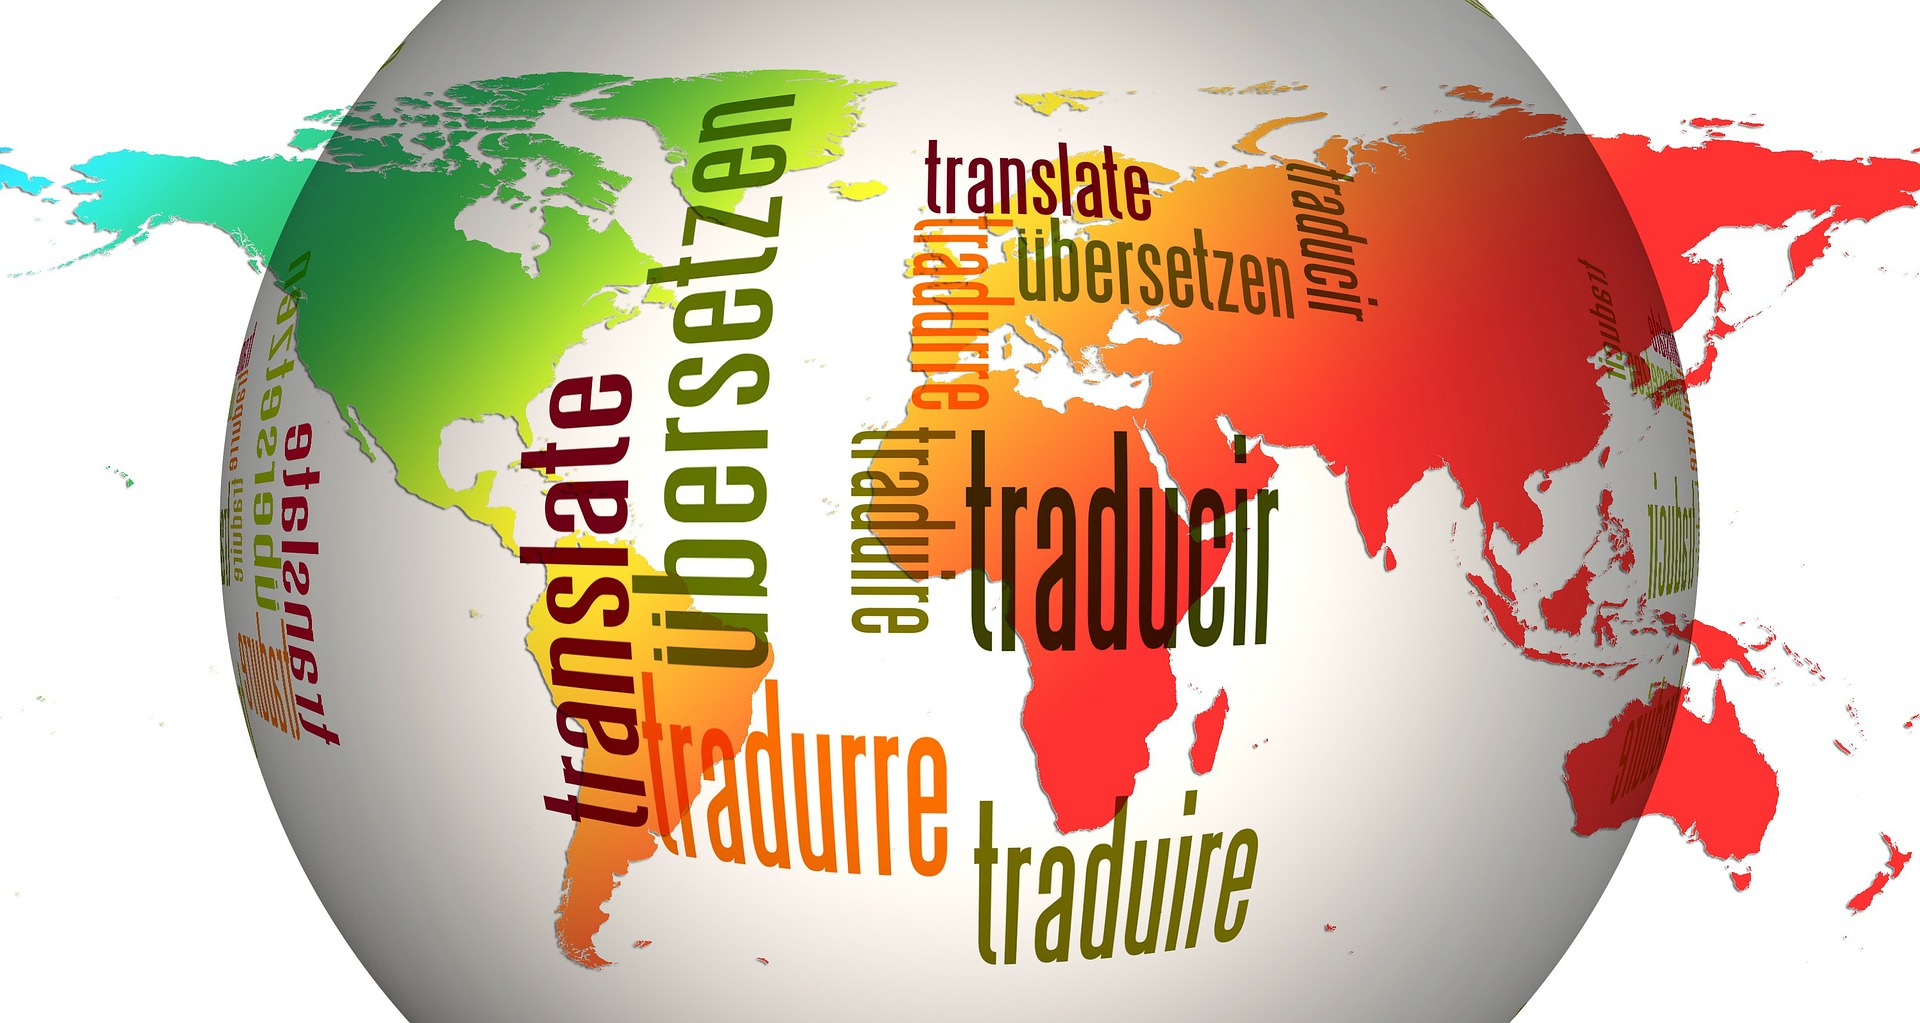 the word translation in multiple langages